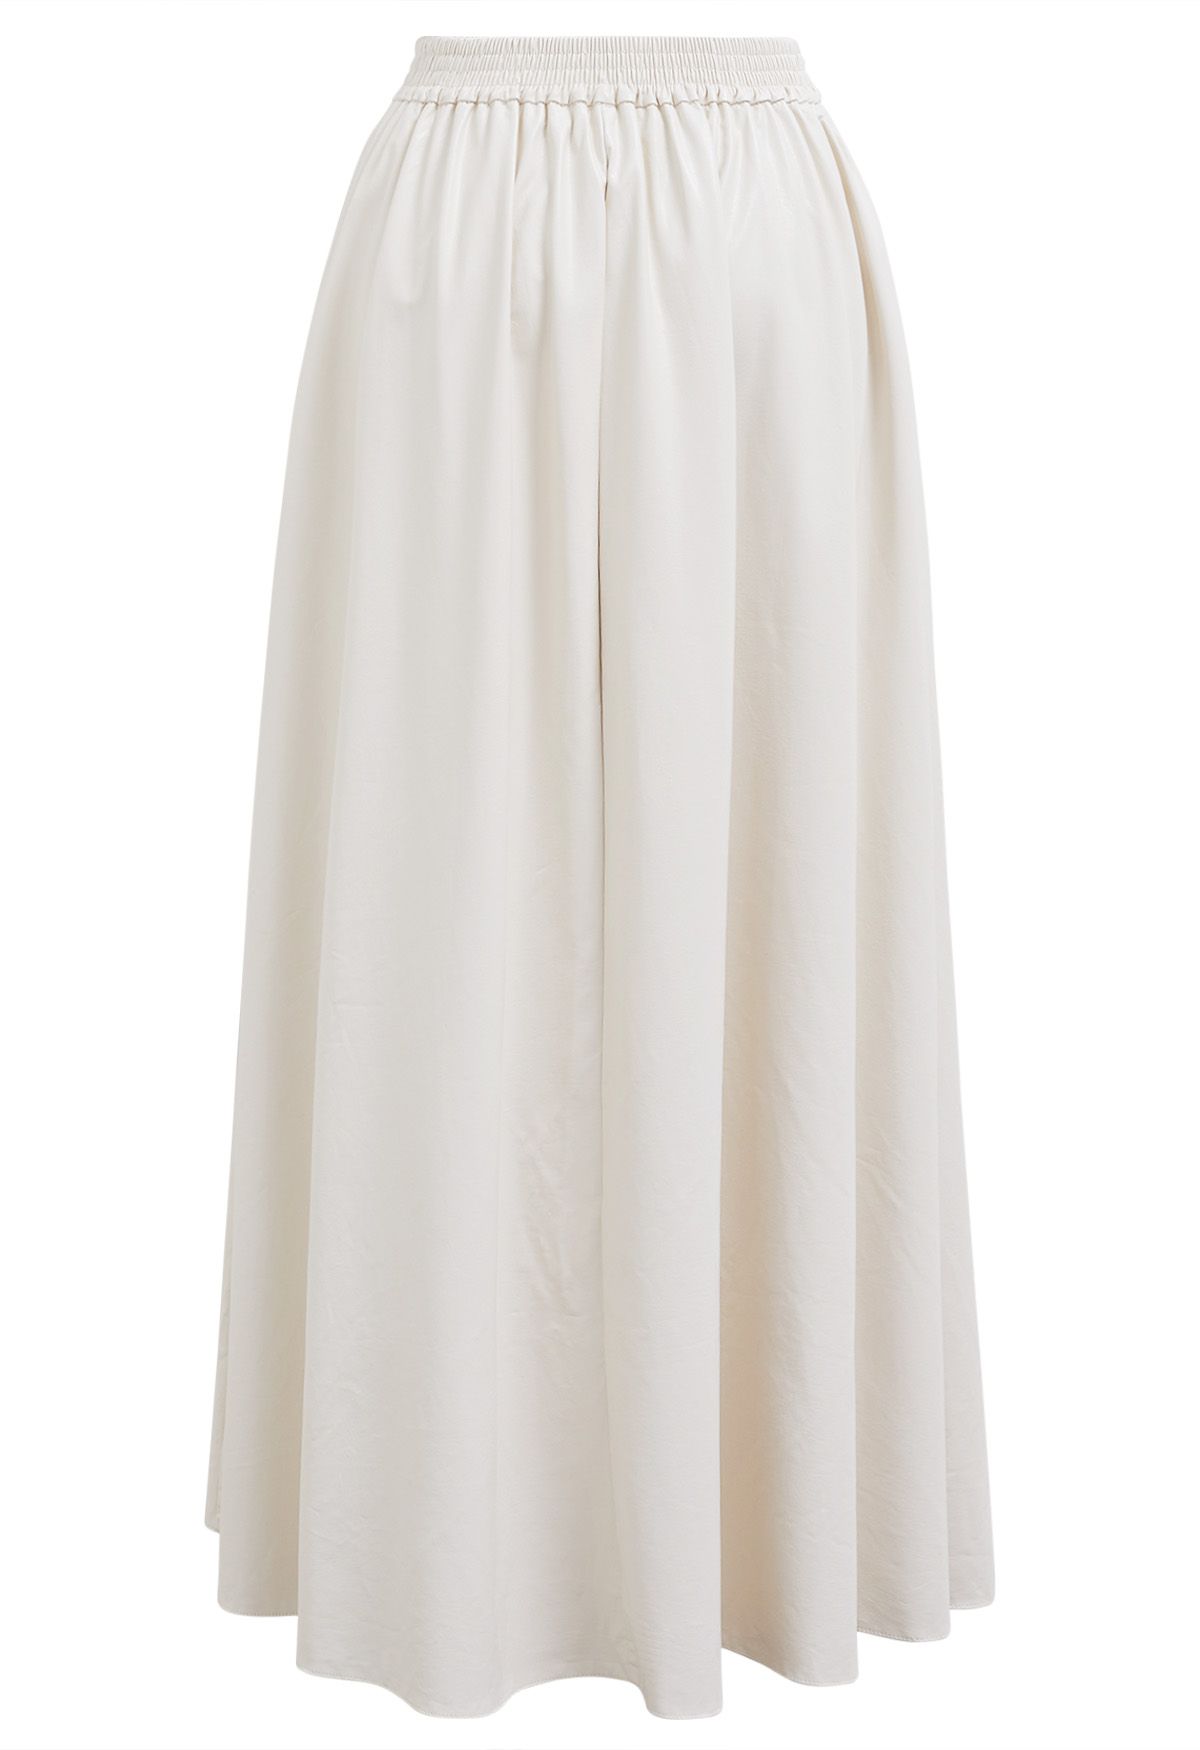 Refined Simplicity Faux Leather Maxi Skirt in Ivory - Retro, Indie and ...